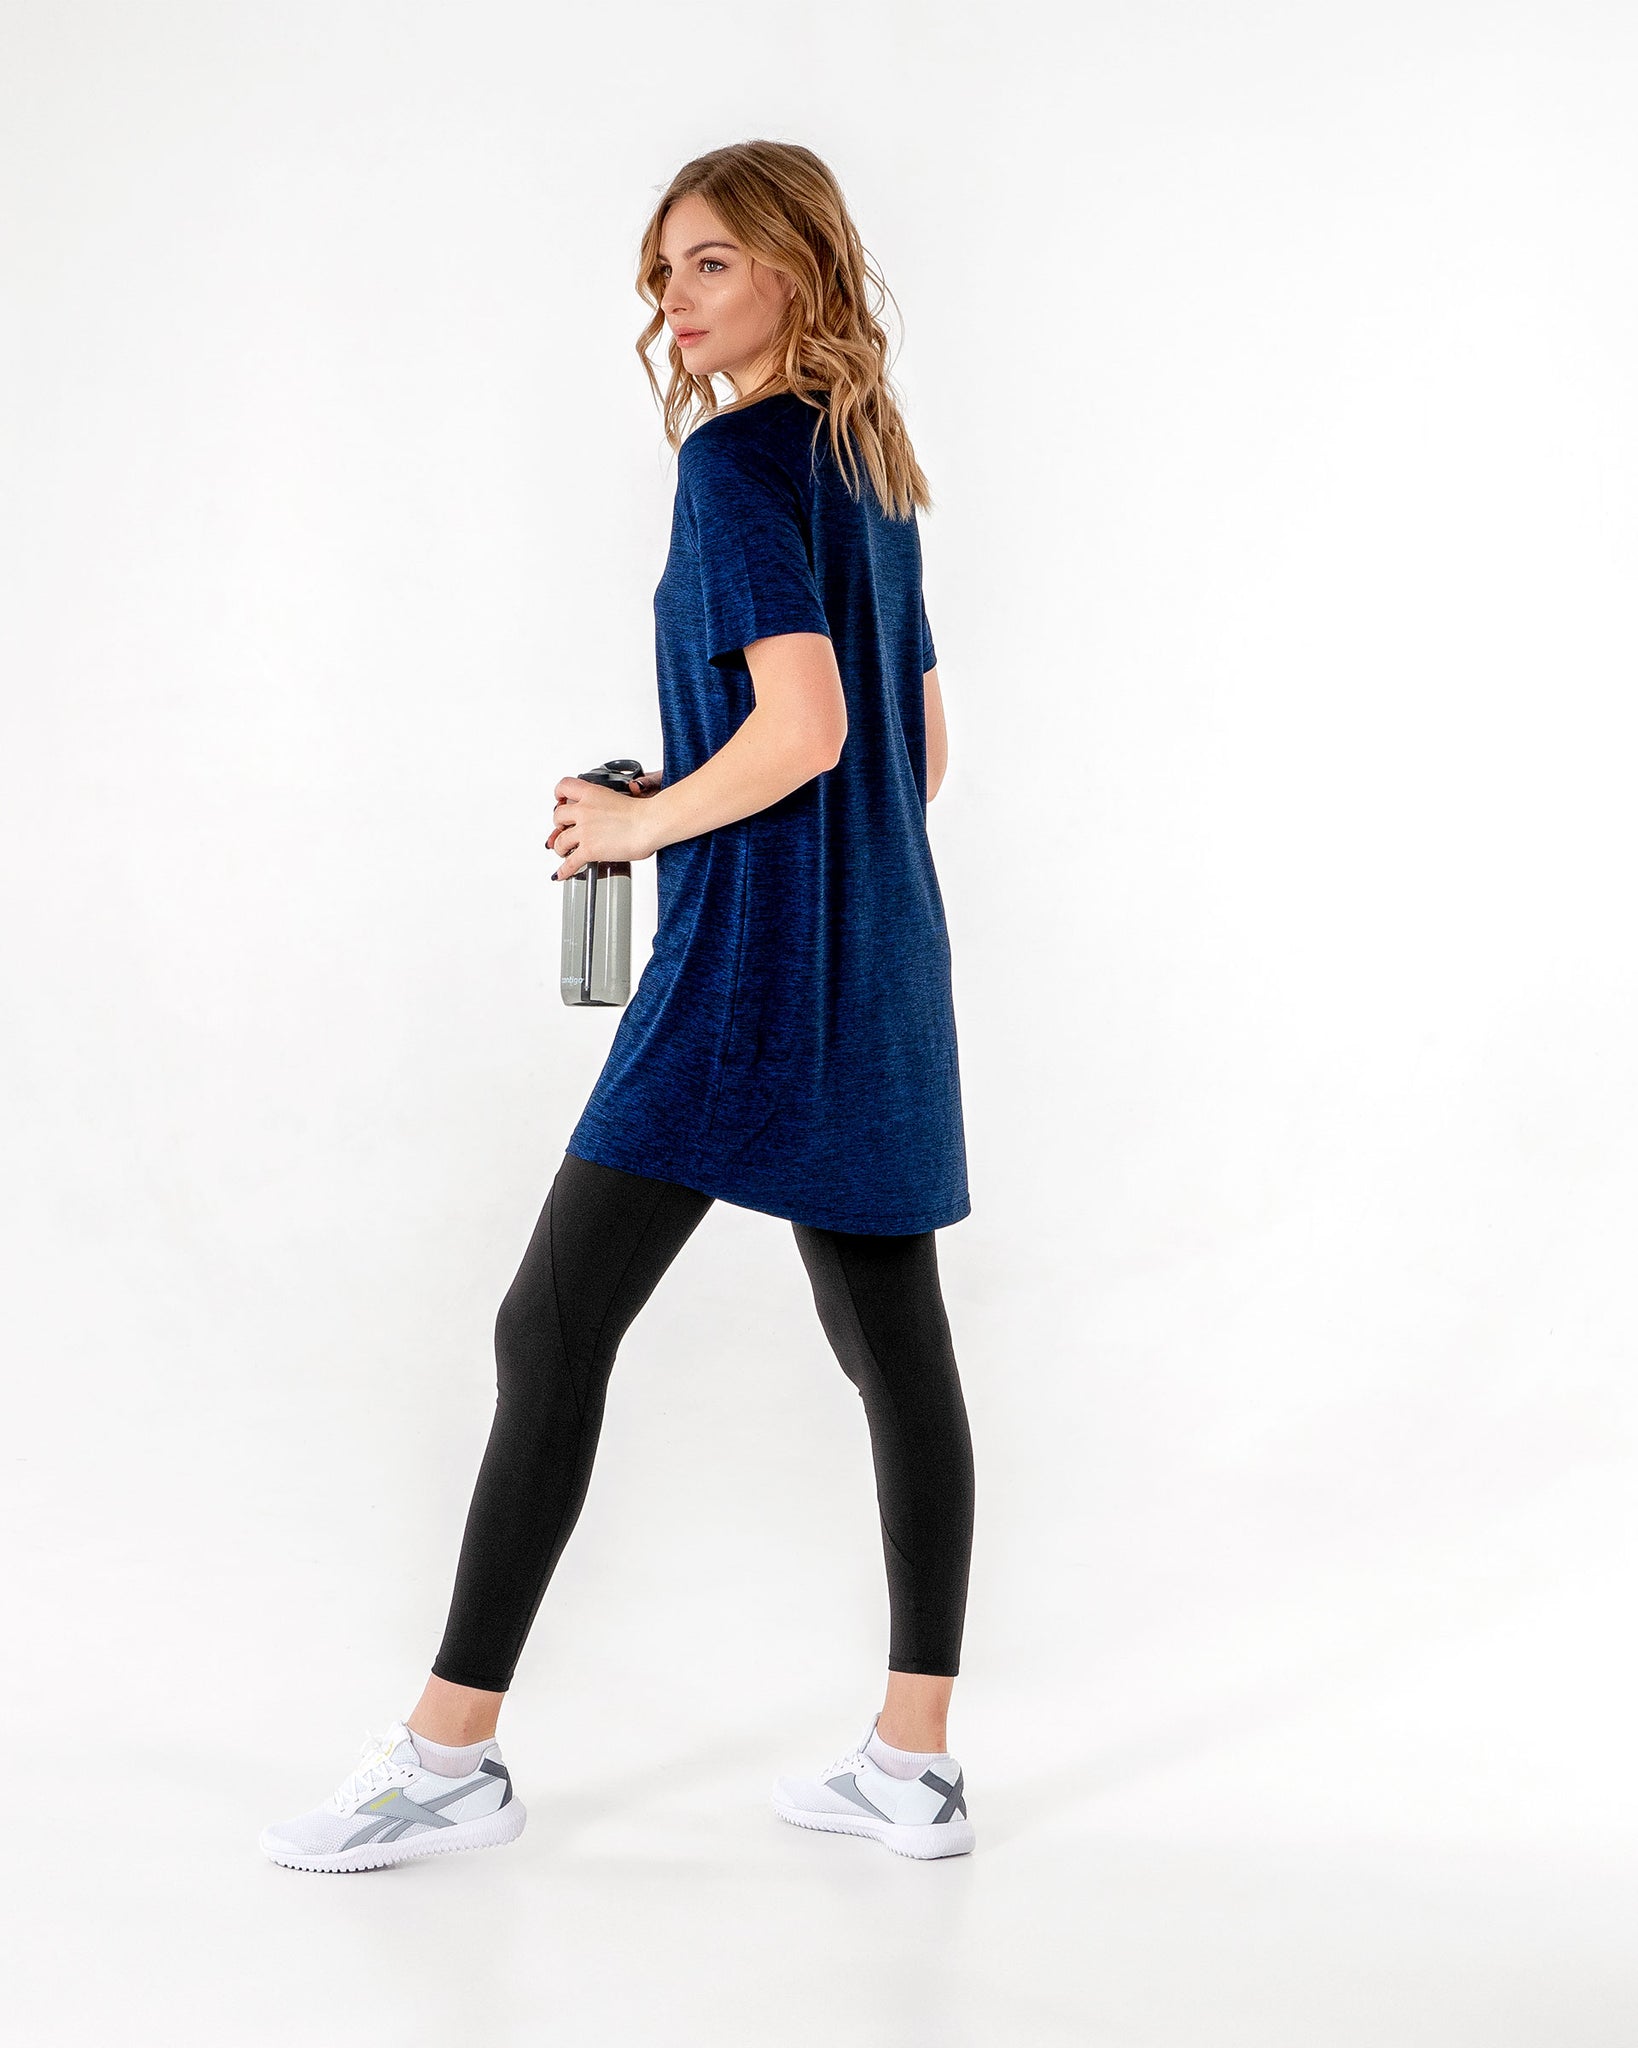 Connect T-Shirt Dress in Blue by Veil Garments. Modest activewear collection.